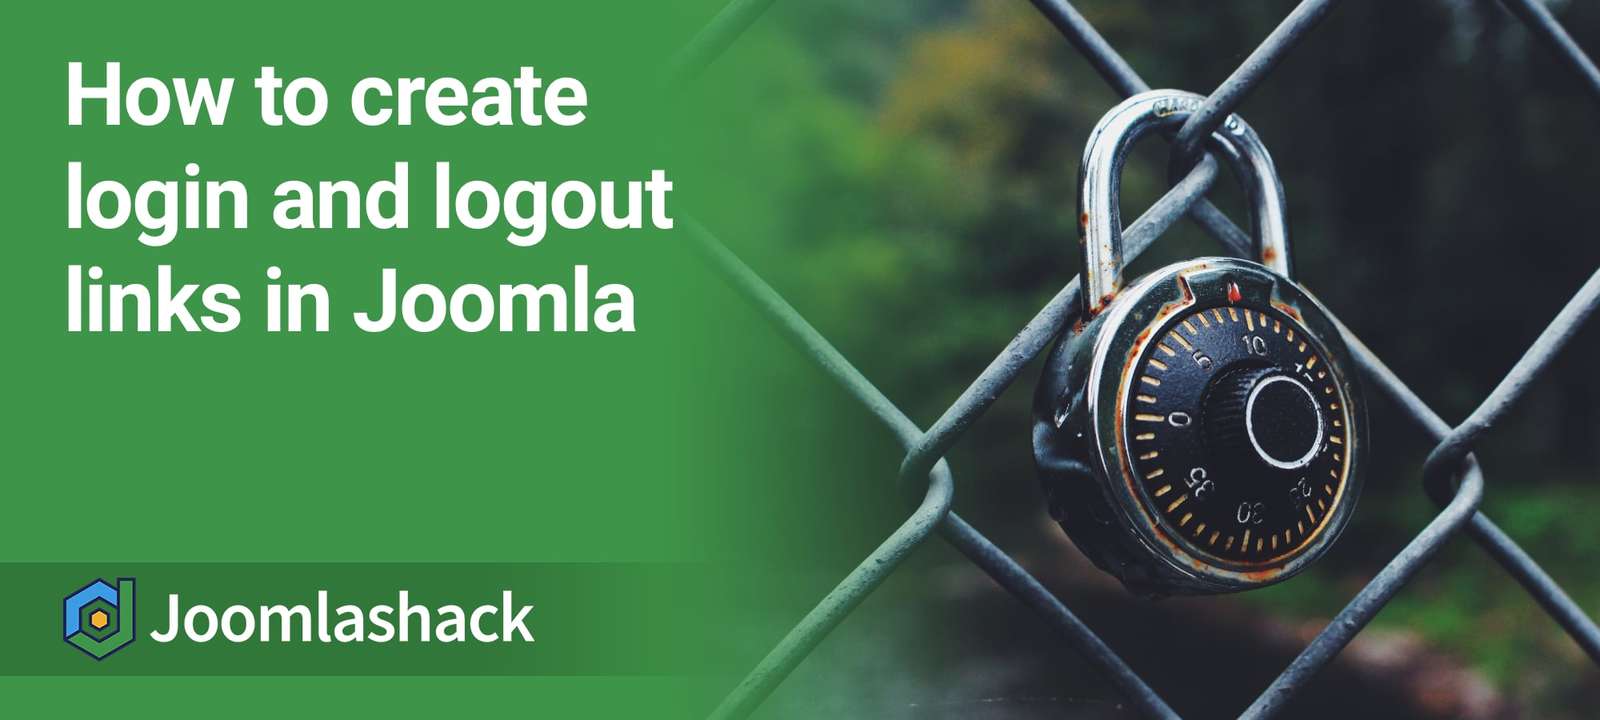 How to Set up Login and Logout Links in Joomla